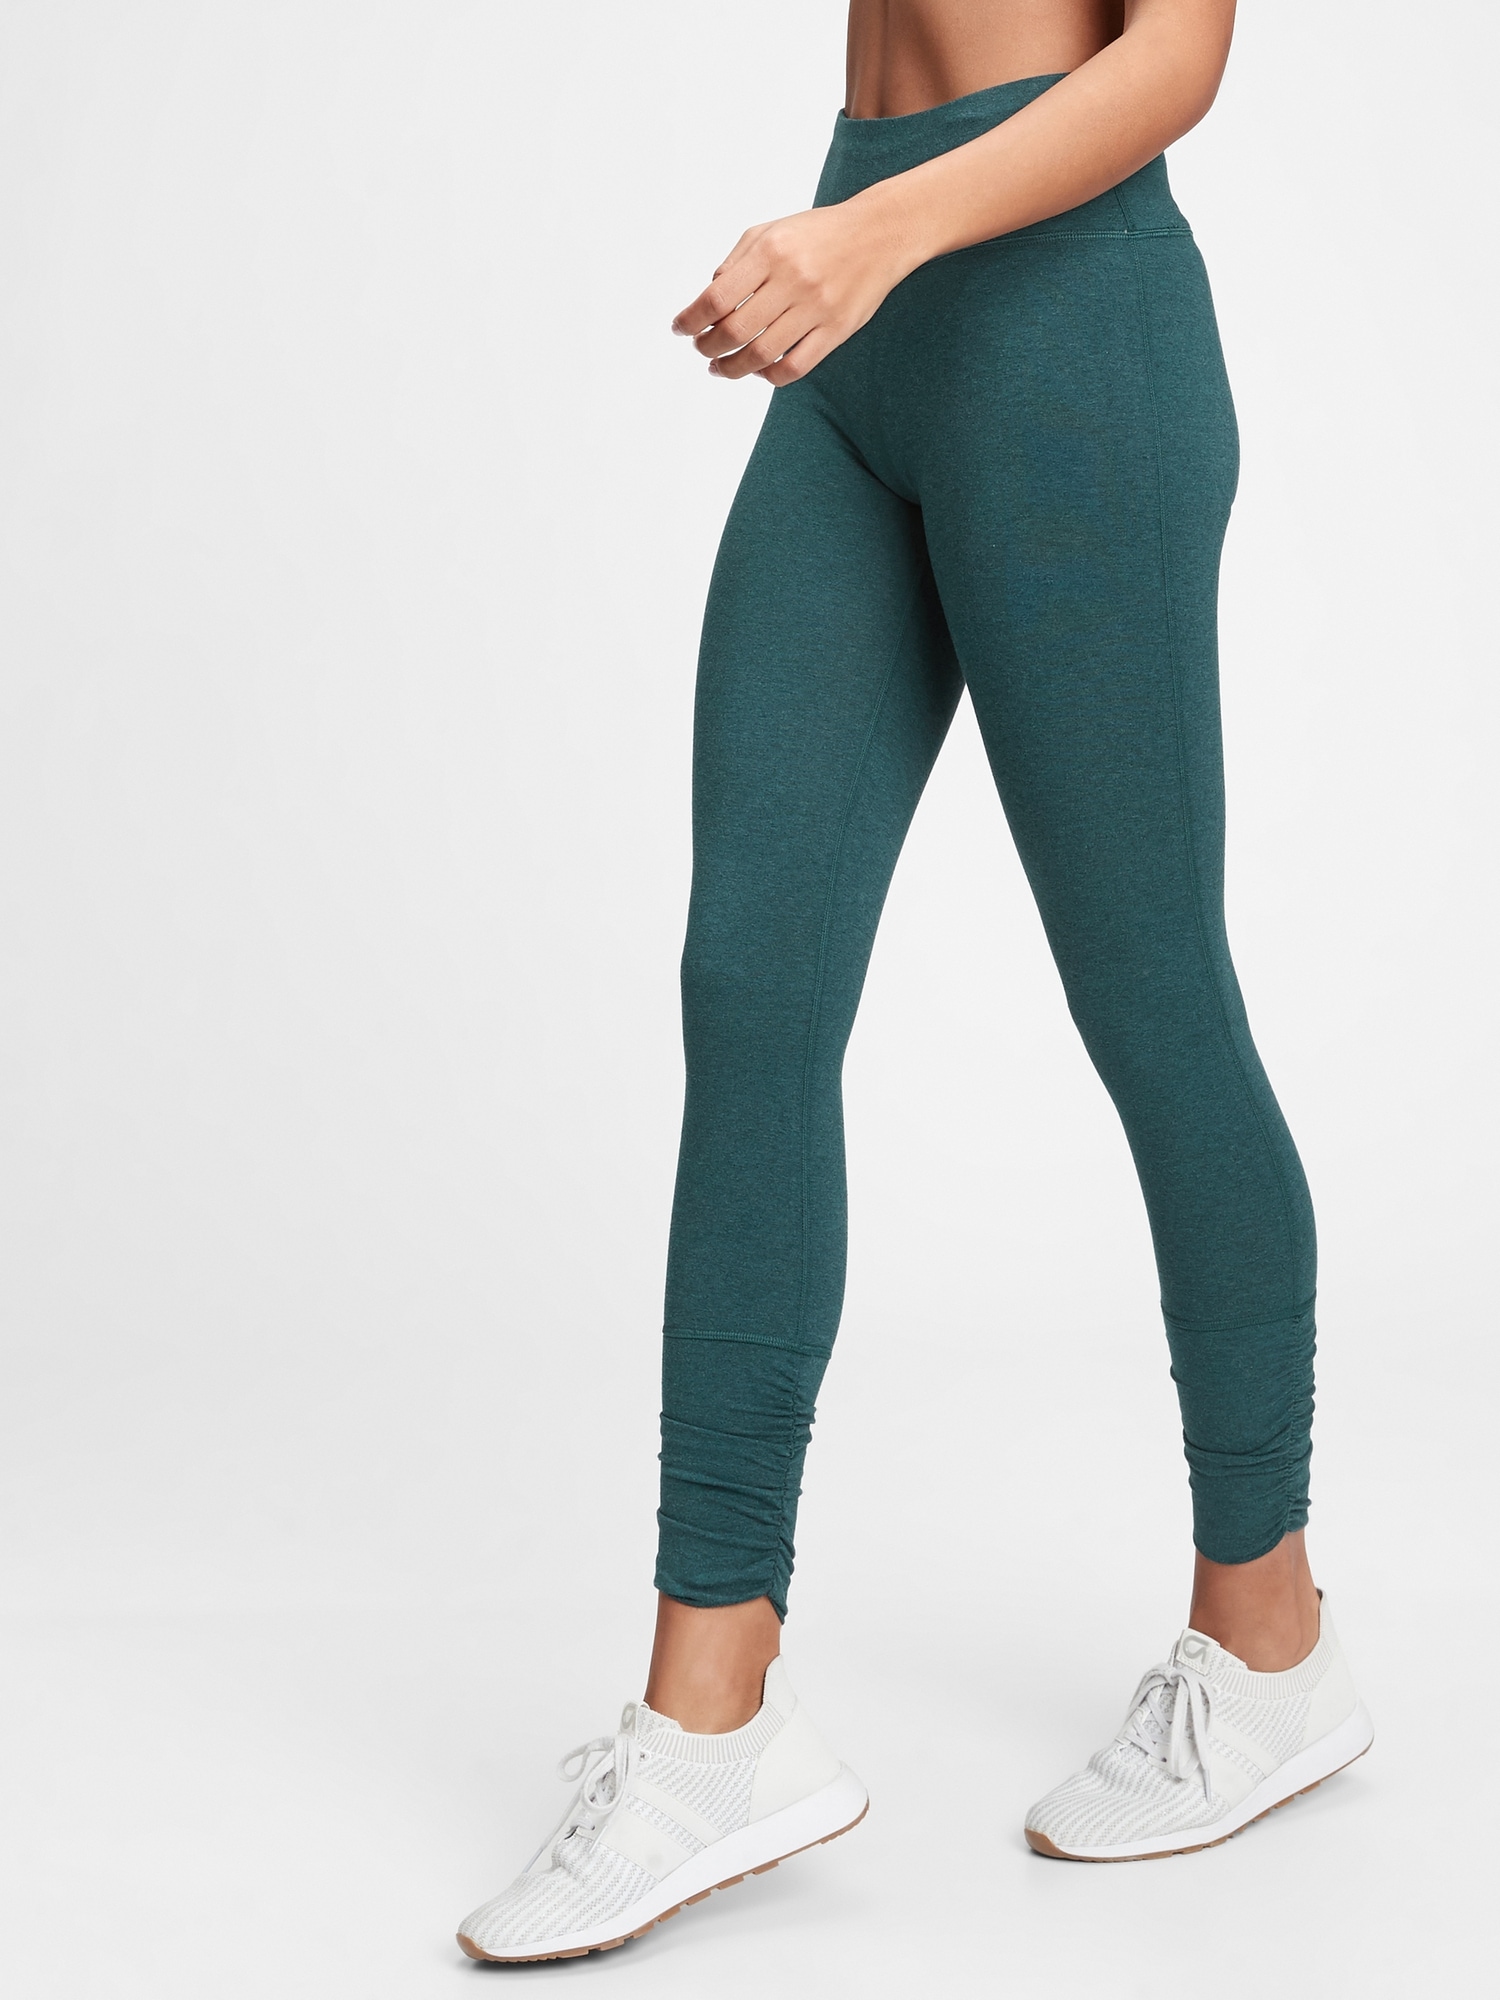 Organic Cotton Leggings For Women Uk  International Society of Precision  Agriculture